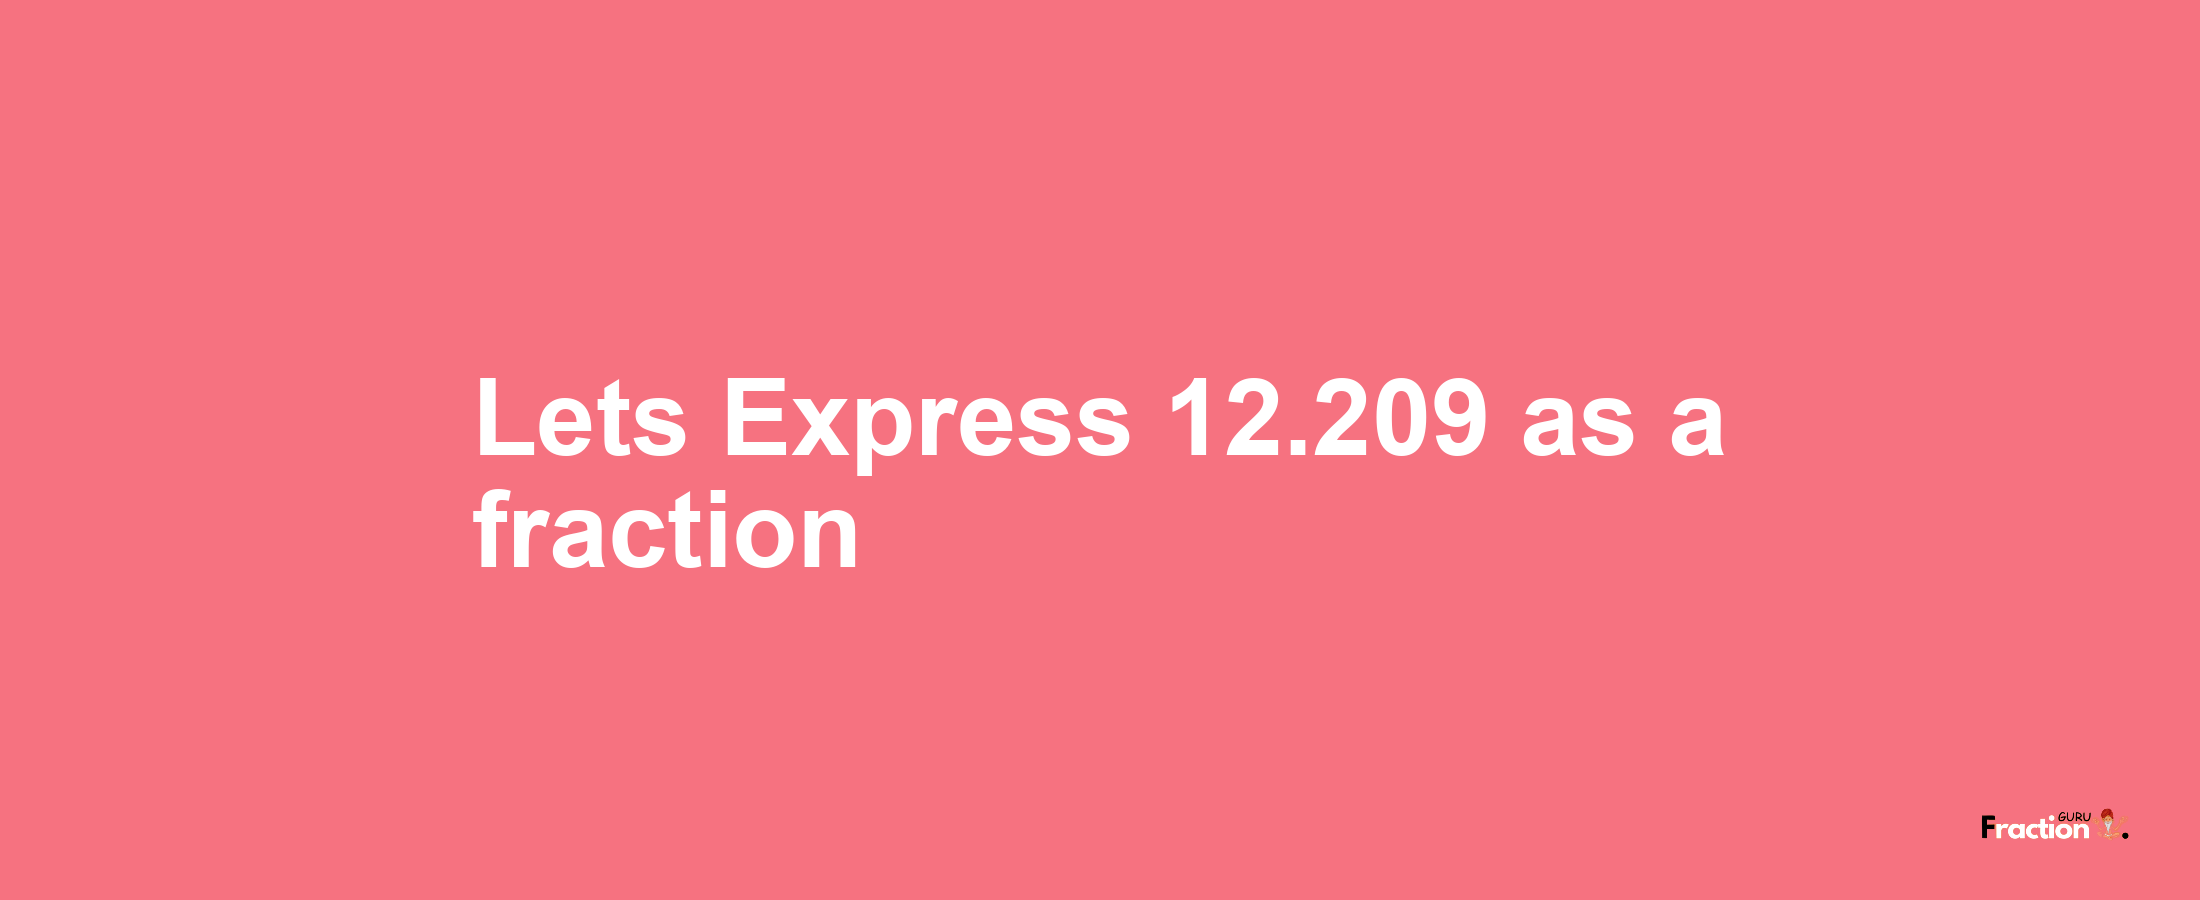 Lets Express 12.209 as afraction